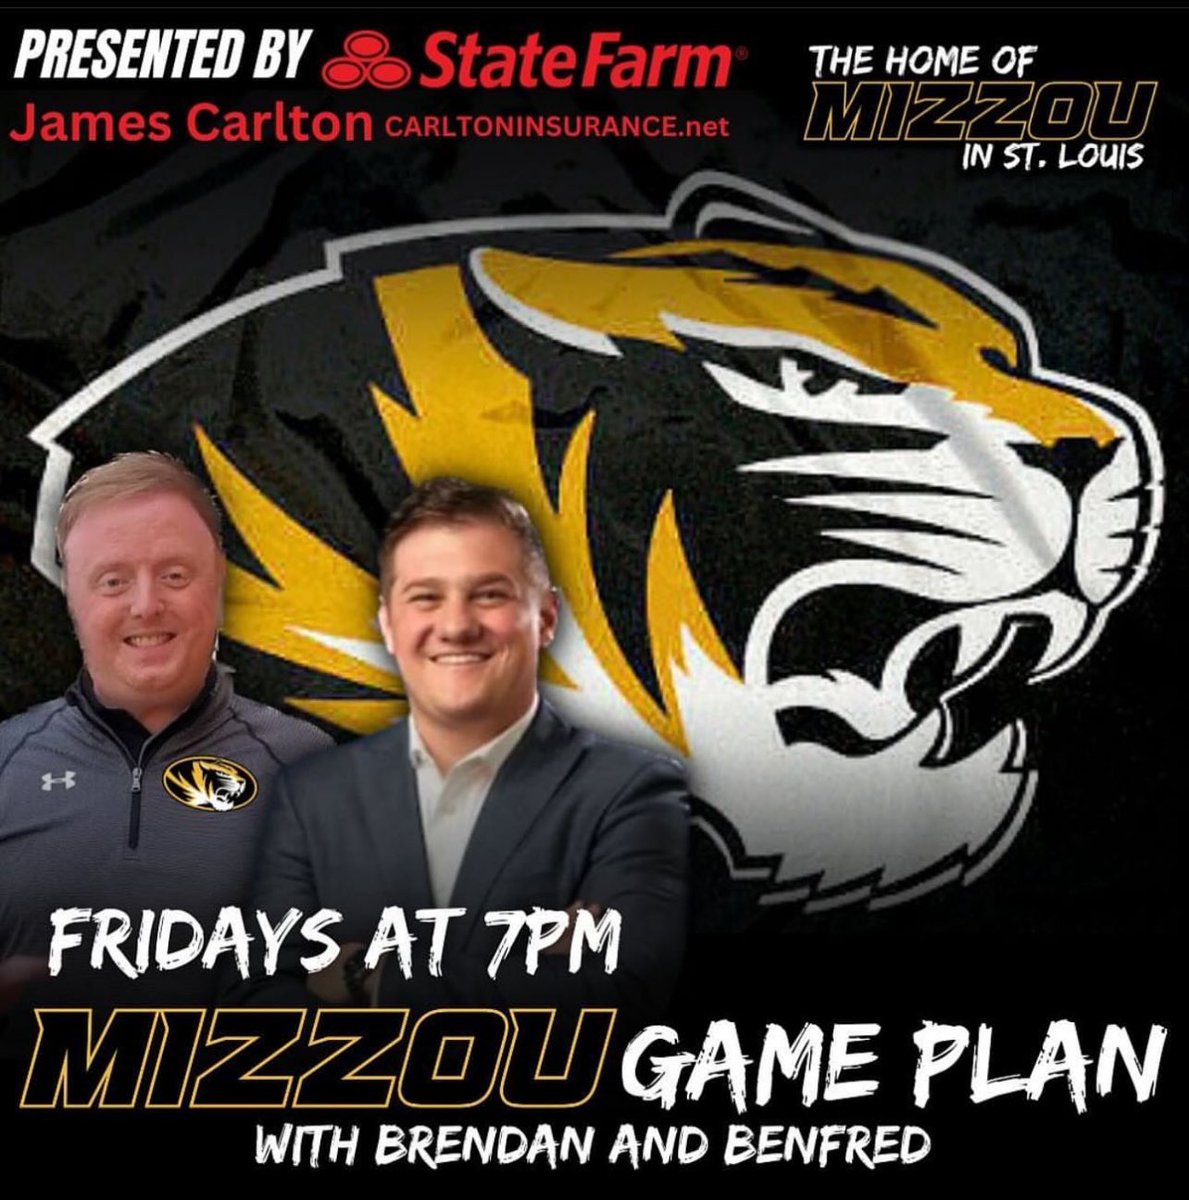 Tonight on GAMEPLAN presented by @JCarltonWG @bwiese16 and @Ben_Fred dive into College Coaching after Saban’s retirement. Plus @MizzouHoops forward @TheAidanShaw joins the show. Tune in tonight 7-9 on @BigSportsShow #WeAreMizzou